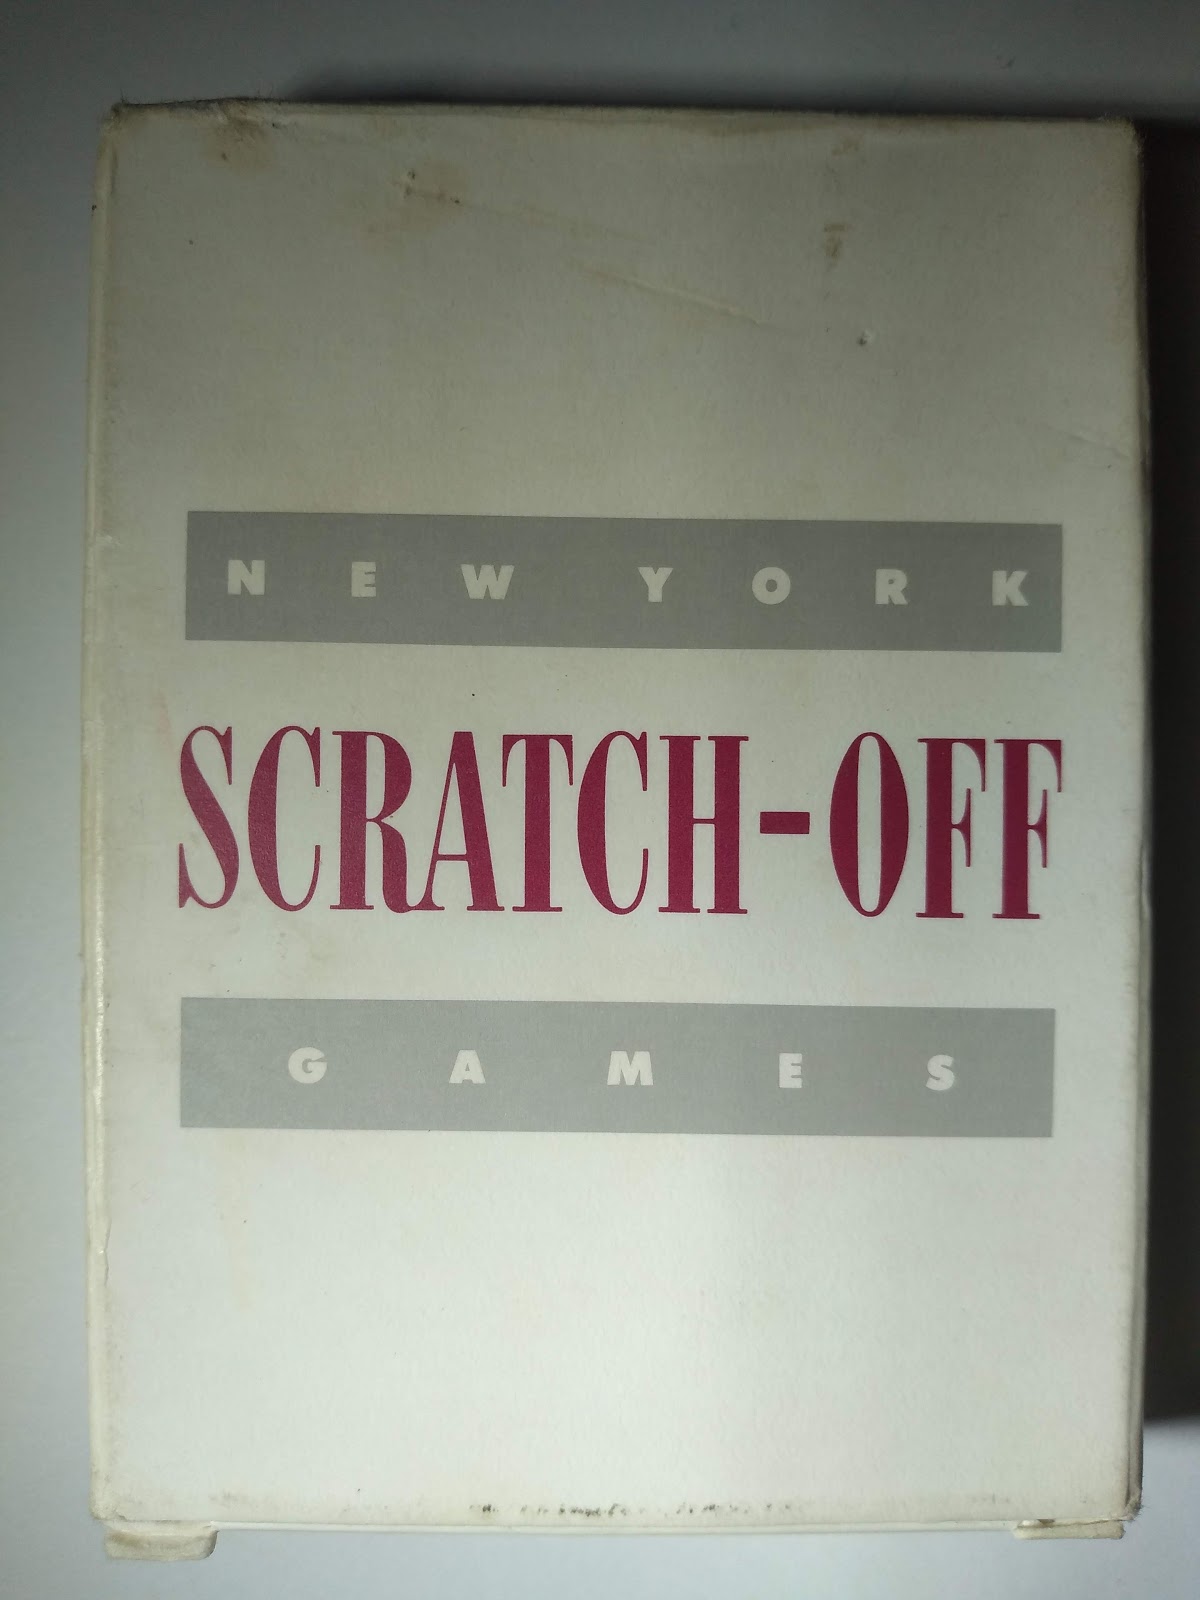 My Card Collection: New York Scratch-Off Games